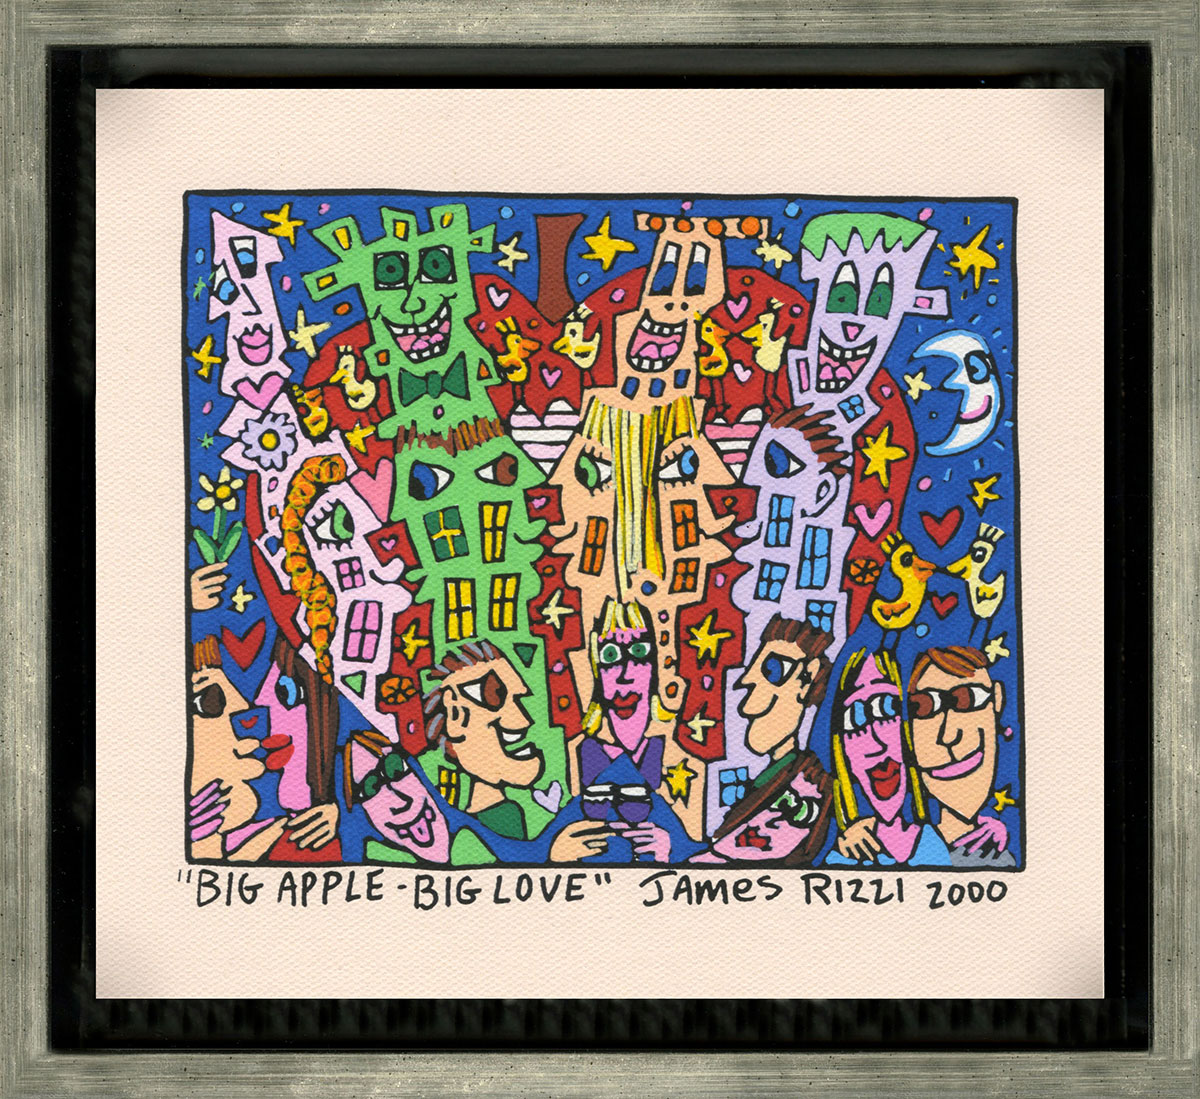 Picture "Big Apple - Big Love", framed by James Rizzi